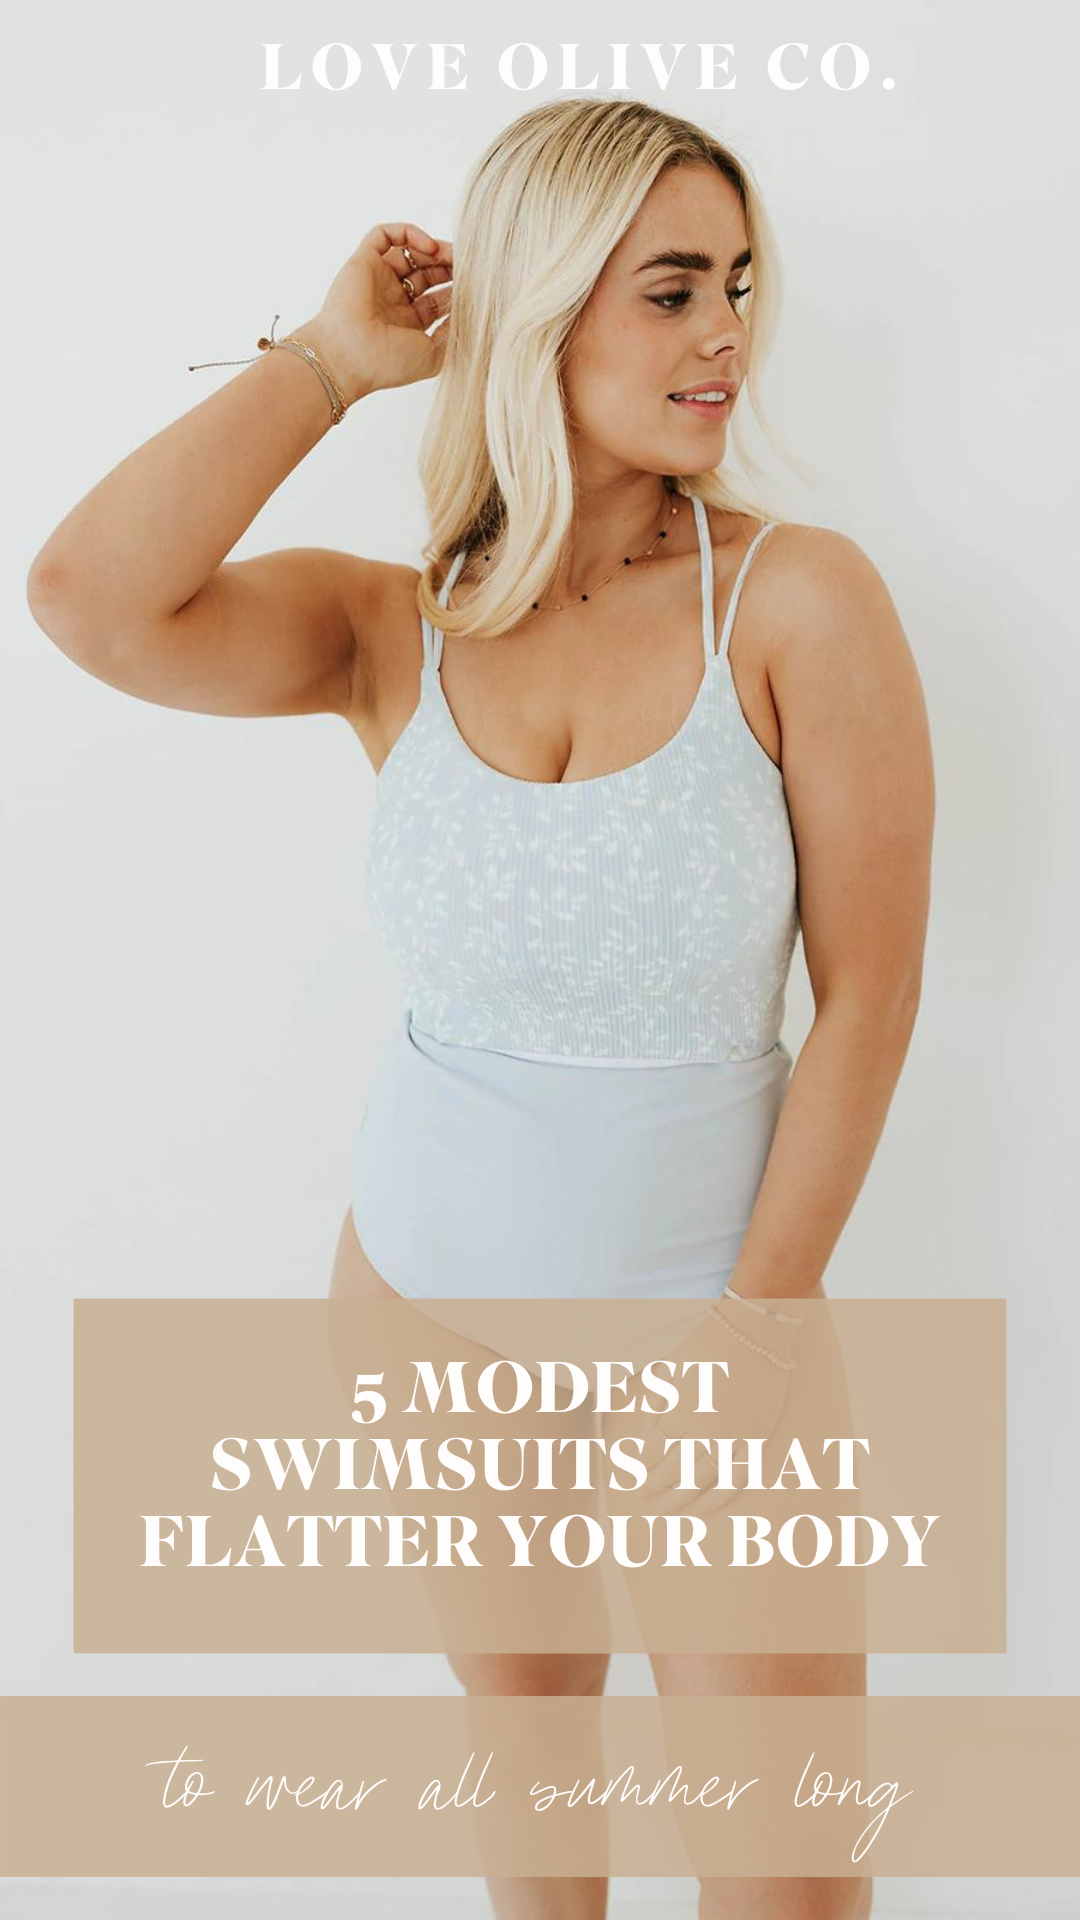 5 modest swimsuits that flatter your body. www.www.loveoliveshop.com